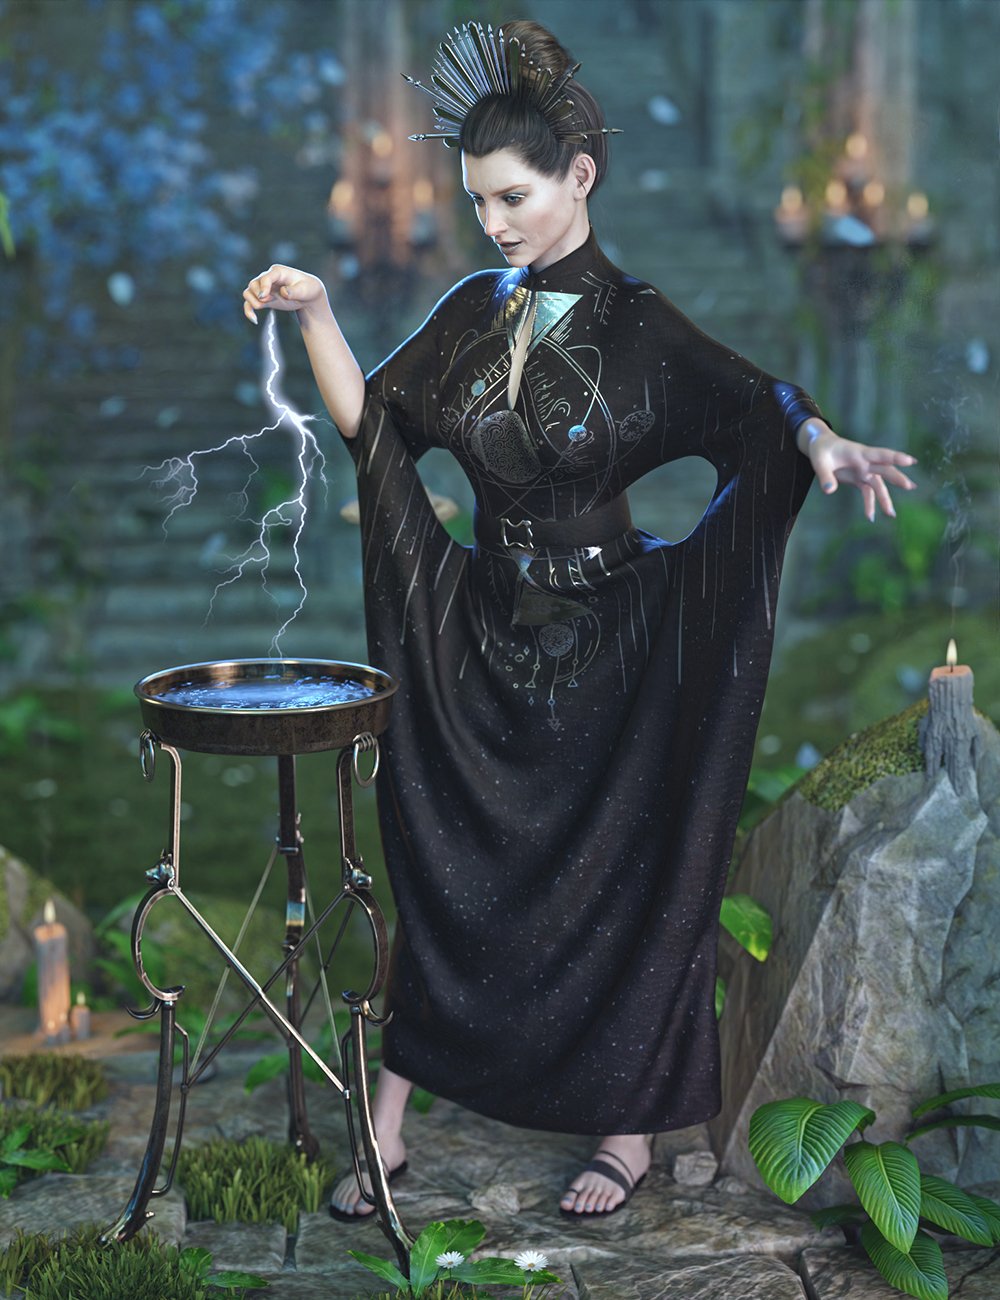 dForce High Priestess Outfit for Genesis 8 Females by: Moonscape GraphicsNikisatezSade, 3D Models by Daz 3D